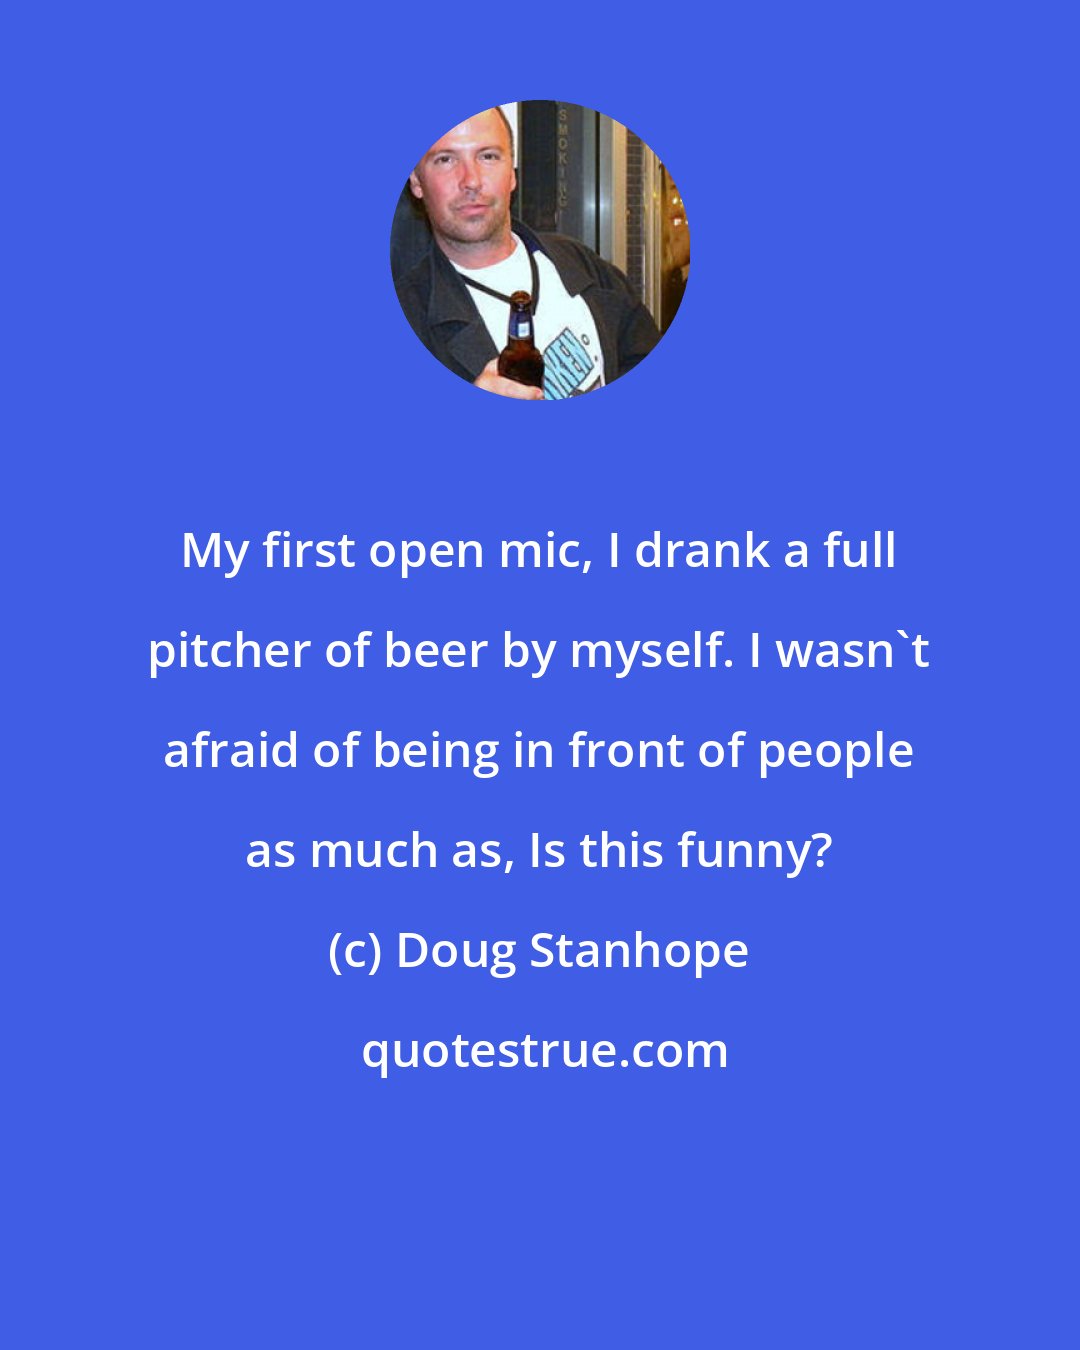 Doug Stanhope: My first open mic, I drank a full pitcher of beer by myself. I wasn't afraid of being in front of people as much as, Is this funny?